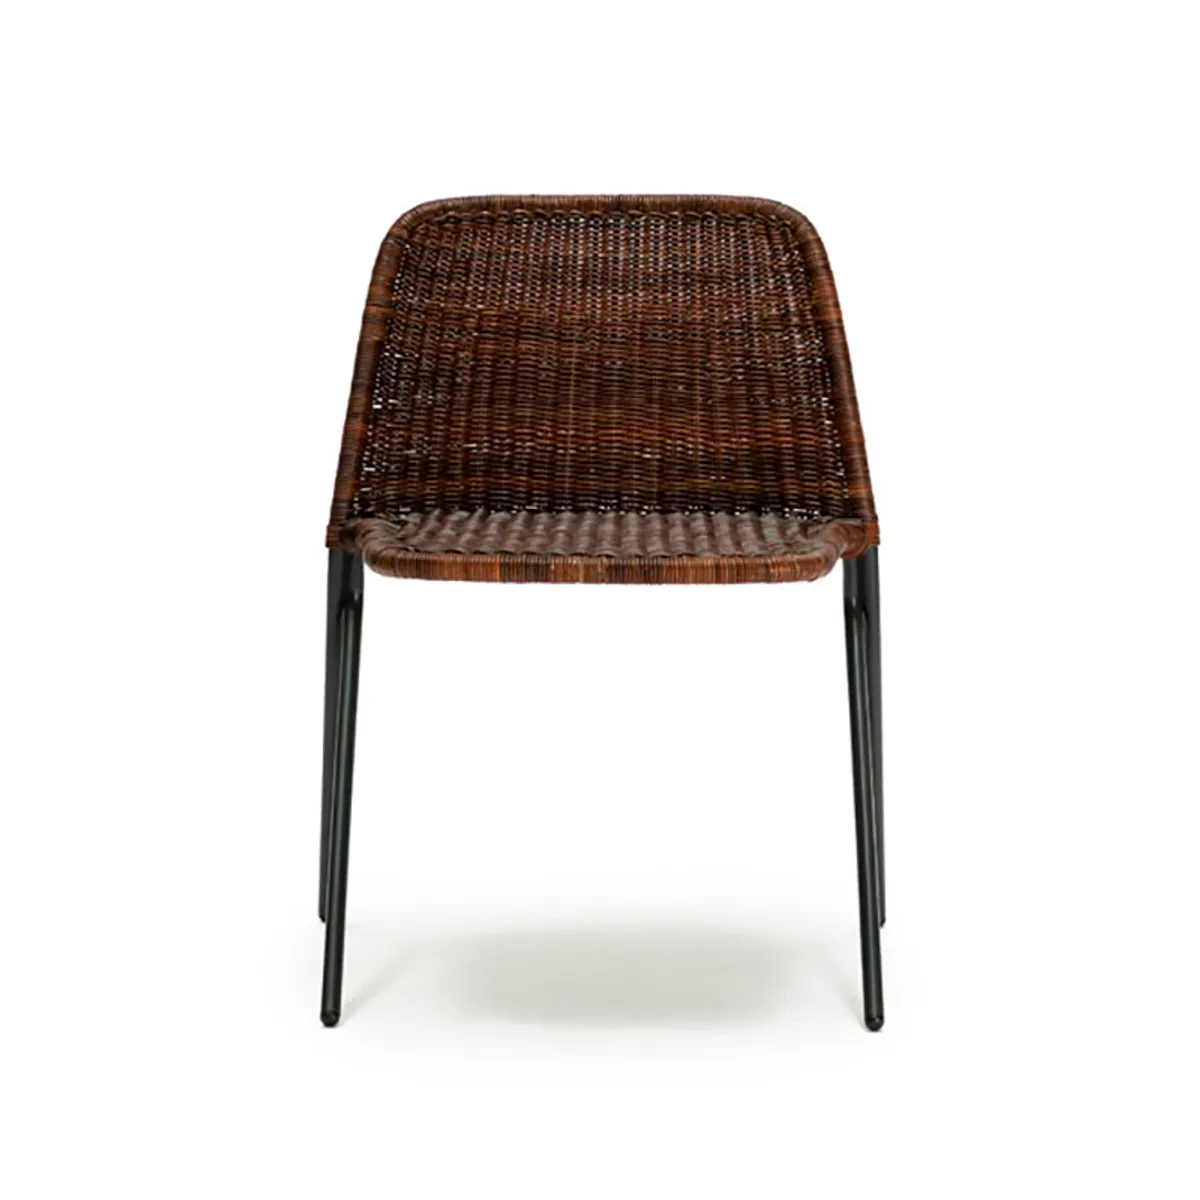 Persi Chair Charcoal Rust Rattan And Metal Furniture For Cafes And Hotel Restaurants 2